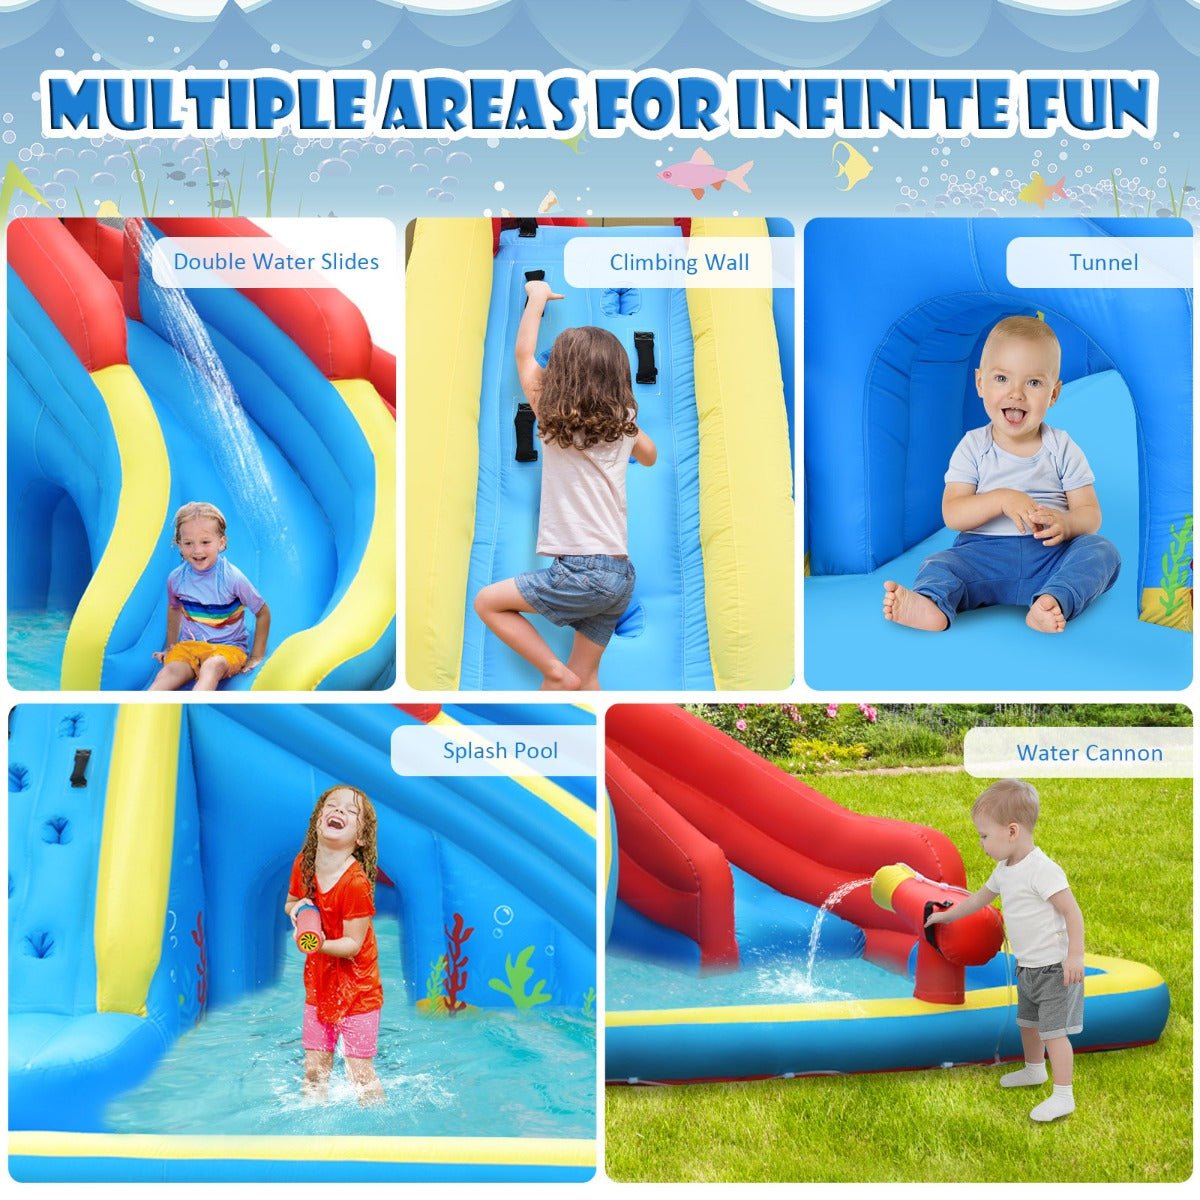 Adventure Awaits with Our Water Fun Set